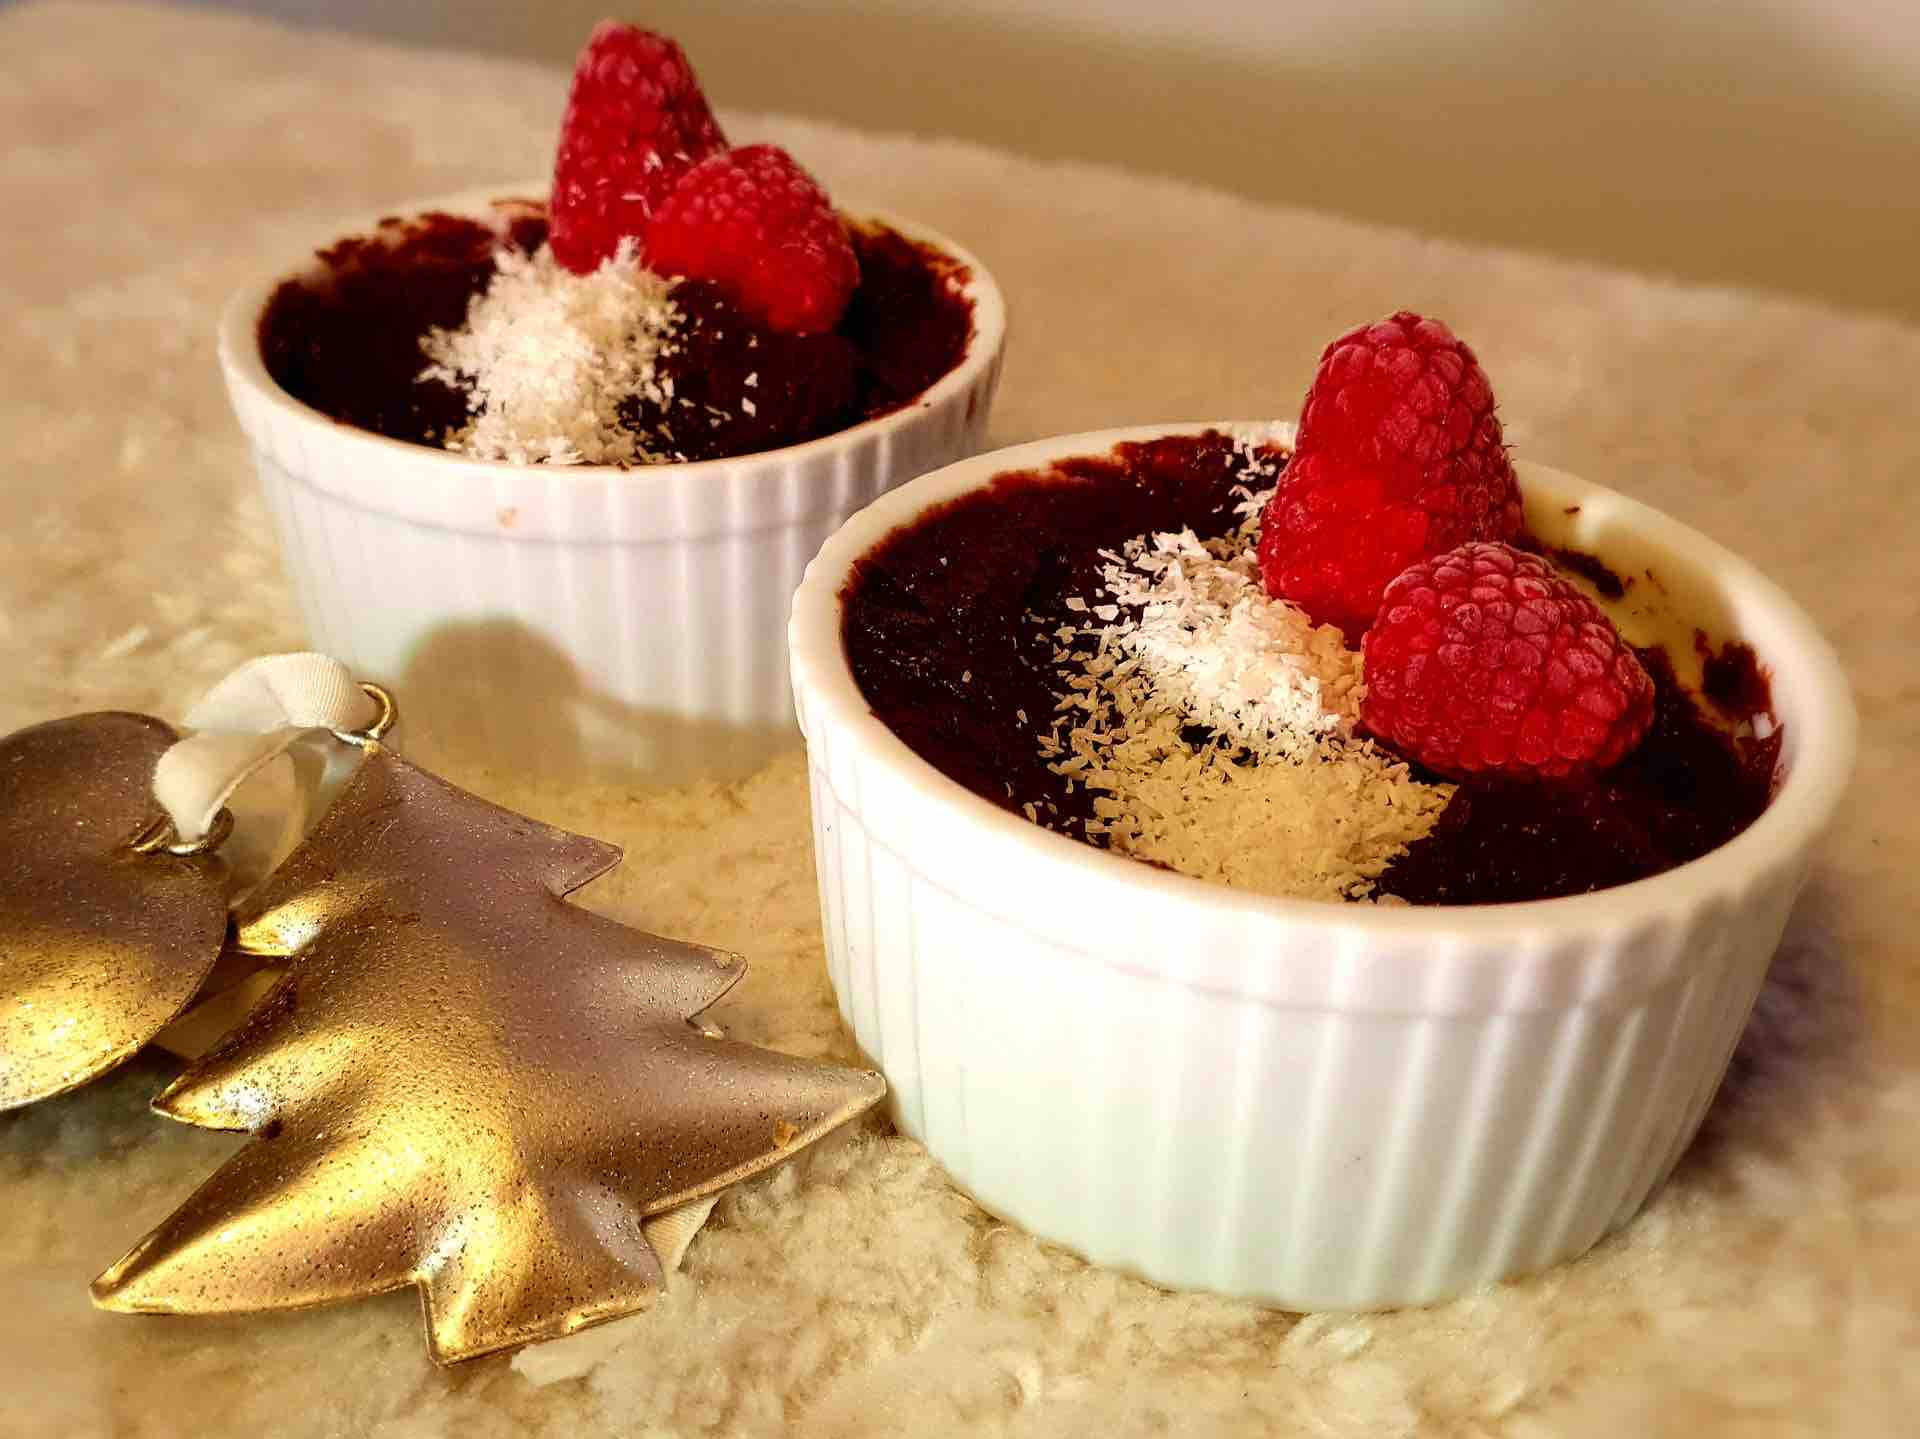 Avo Chocolate Mousse Recipe Awesome Superquick Chocolate Avo Mousse Piece Of Plate